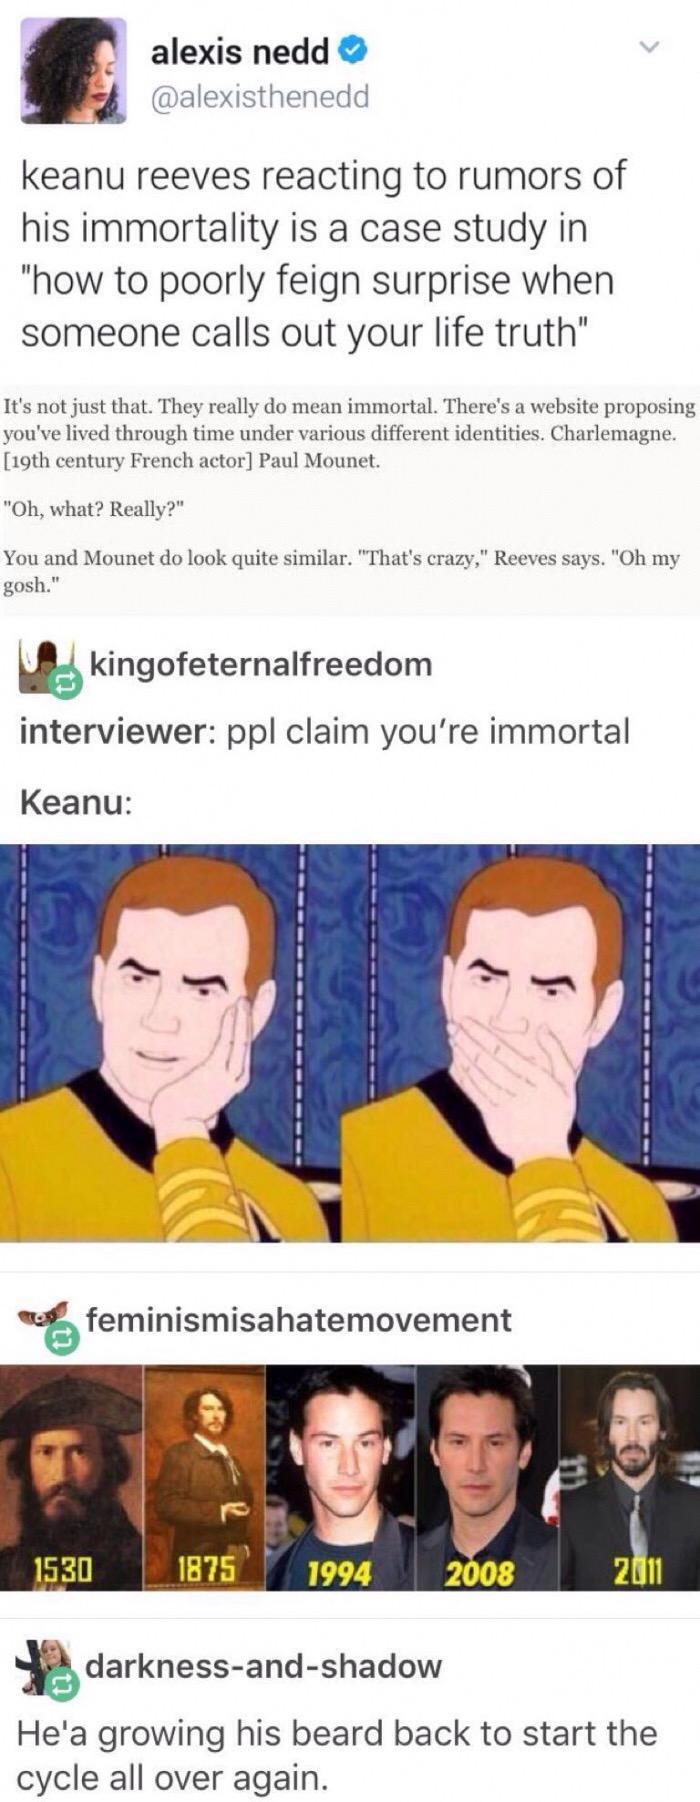 keanu reeves immortal reaction - alexis nedd keanu reeves reacting to rumors of his immortality is a case study in "how to poorly feign surprise when someone calls out your life truth" It's not just that. They really do mean immortal. There's a website pr